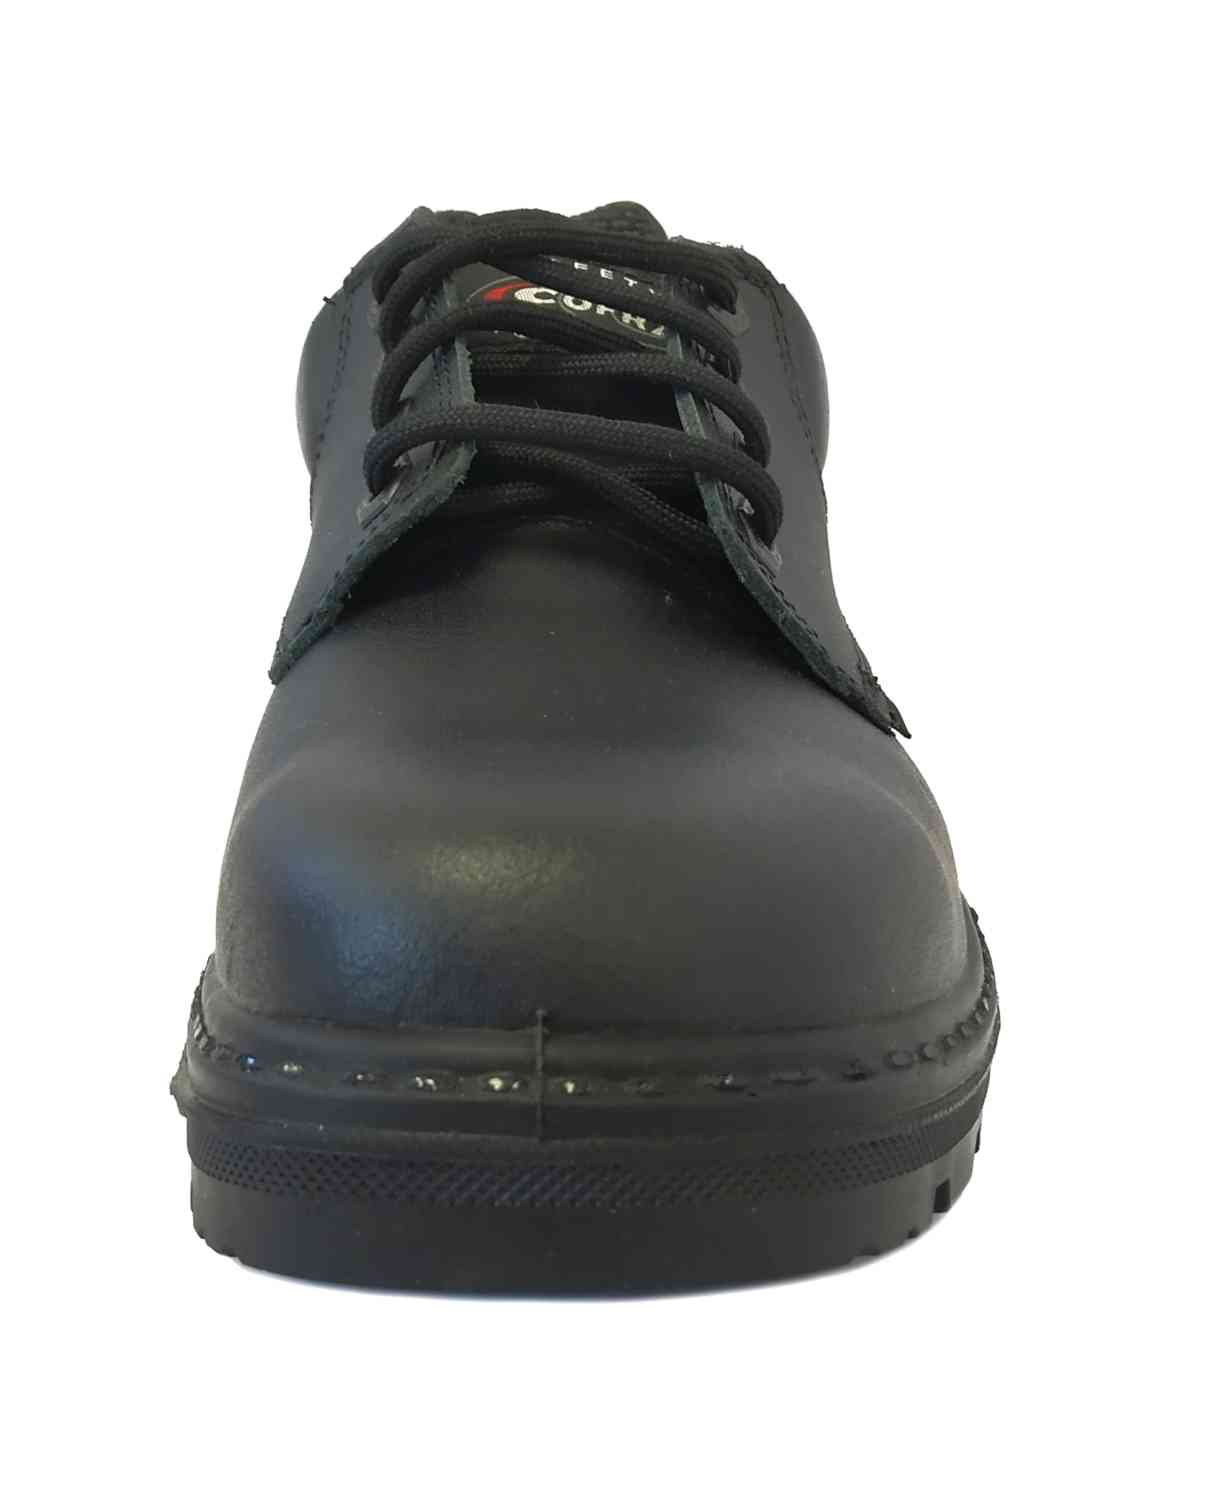 Cofra Small S3 Safety Shoes Steel Toe Cap Water Repellent Upper